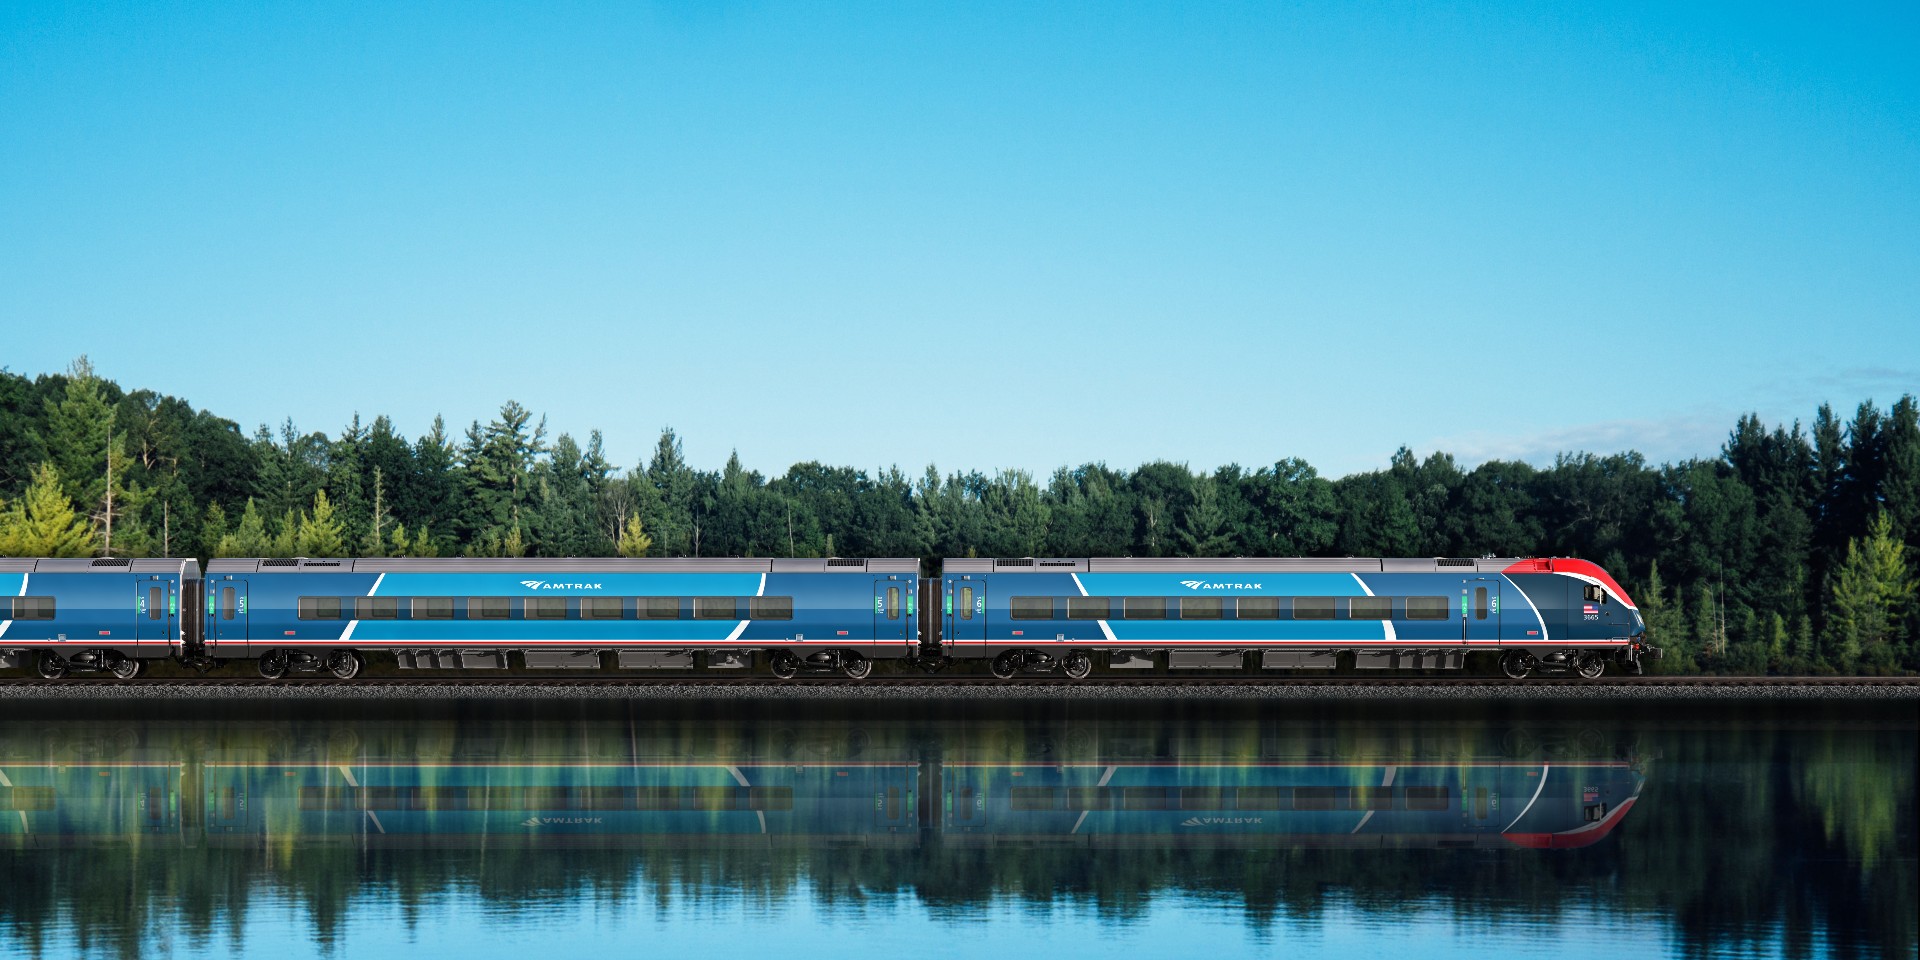 Check out Amtrak's new state-of-the-art Airo trains | Electrek